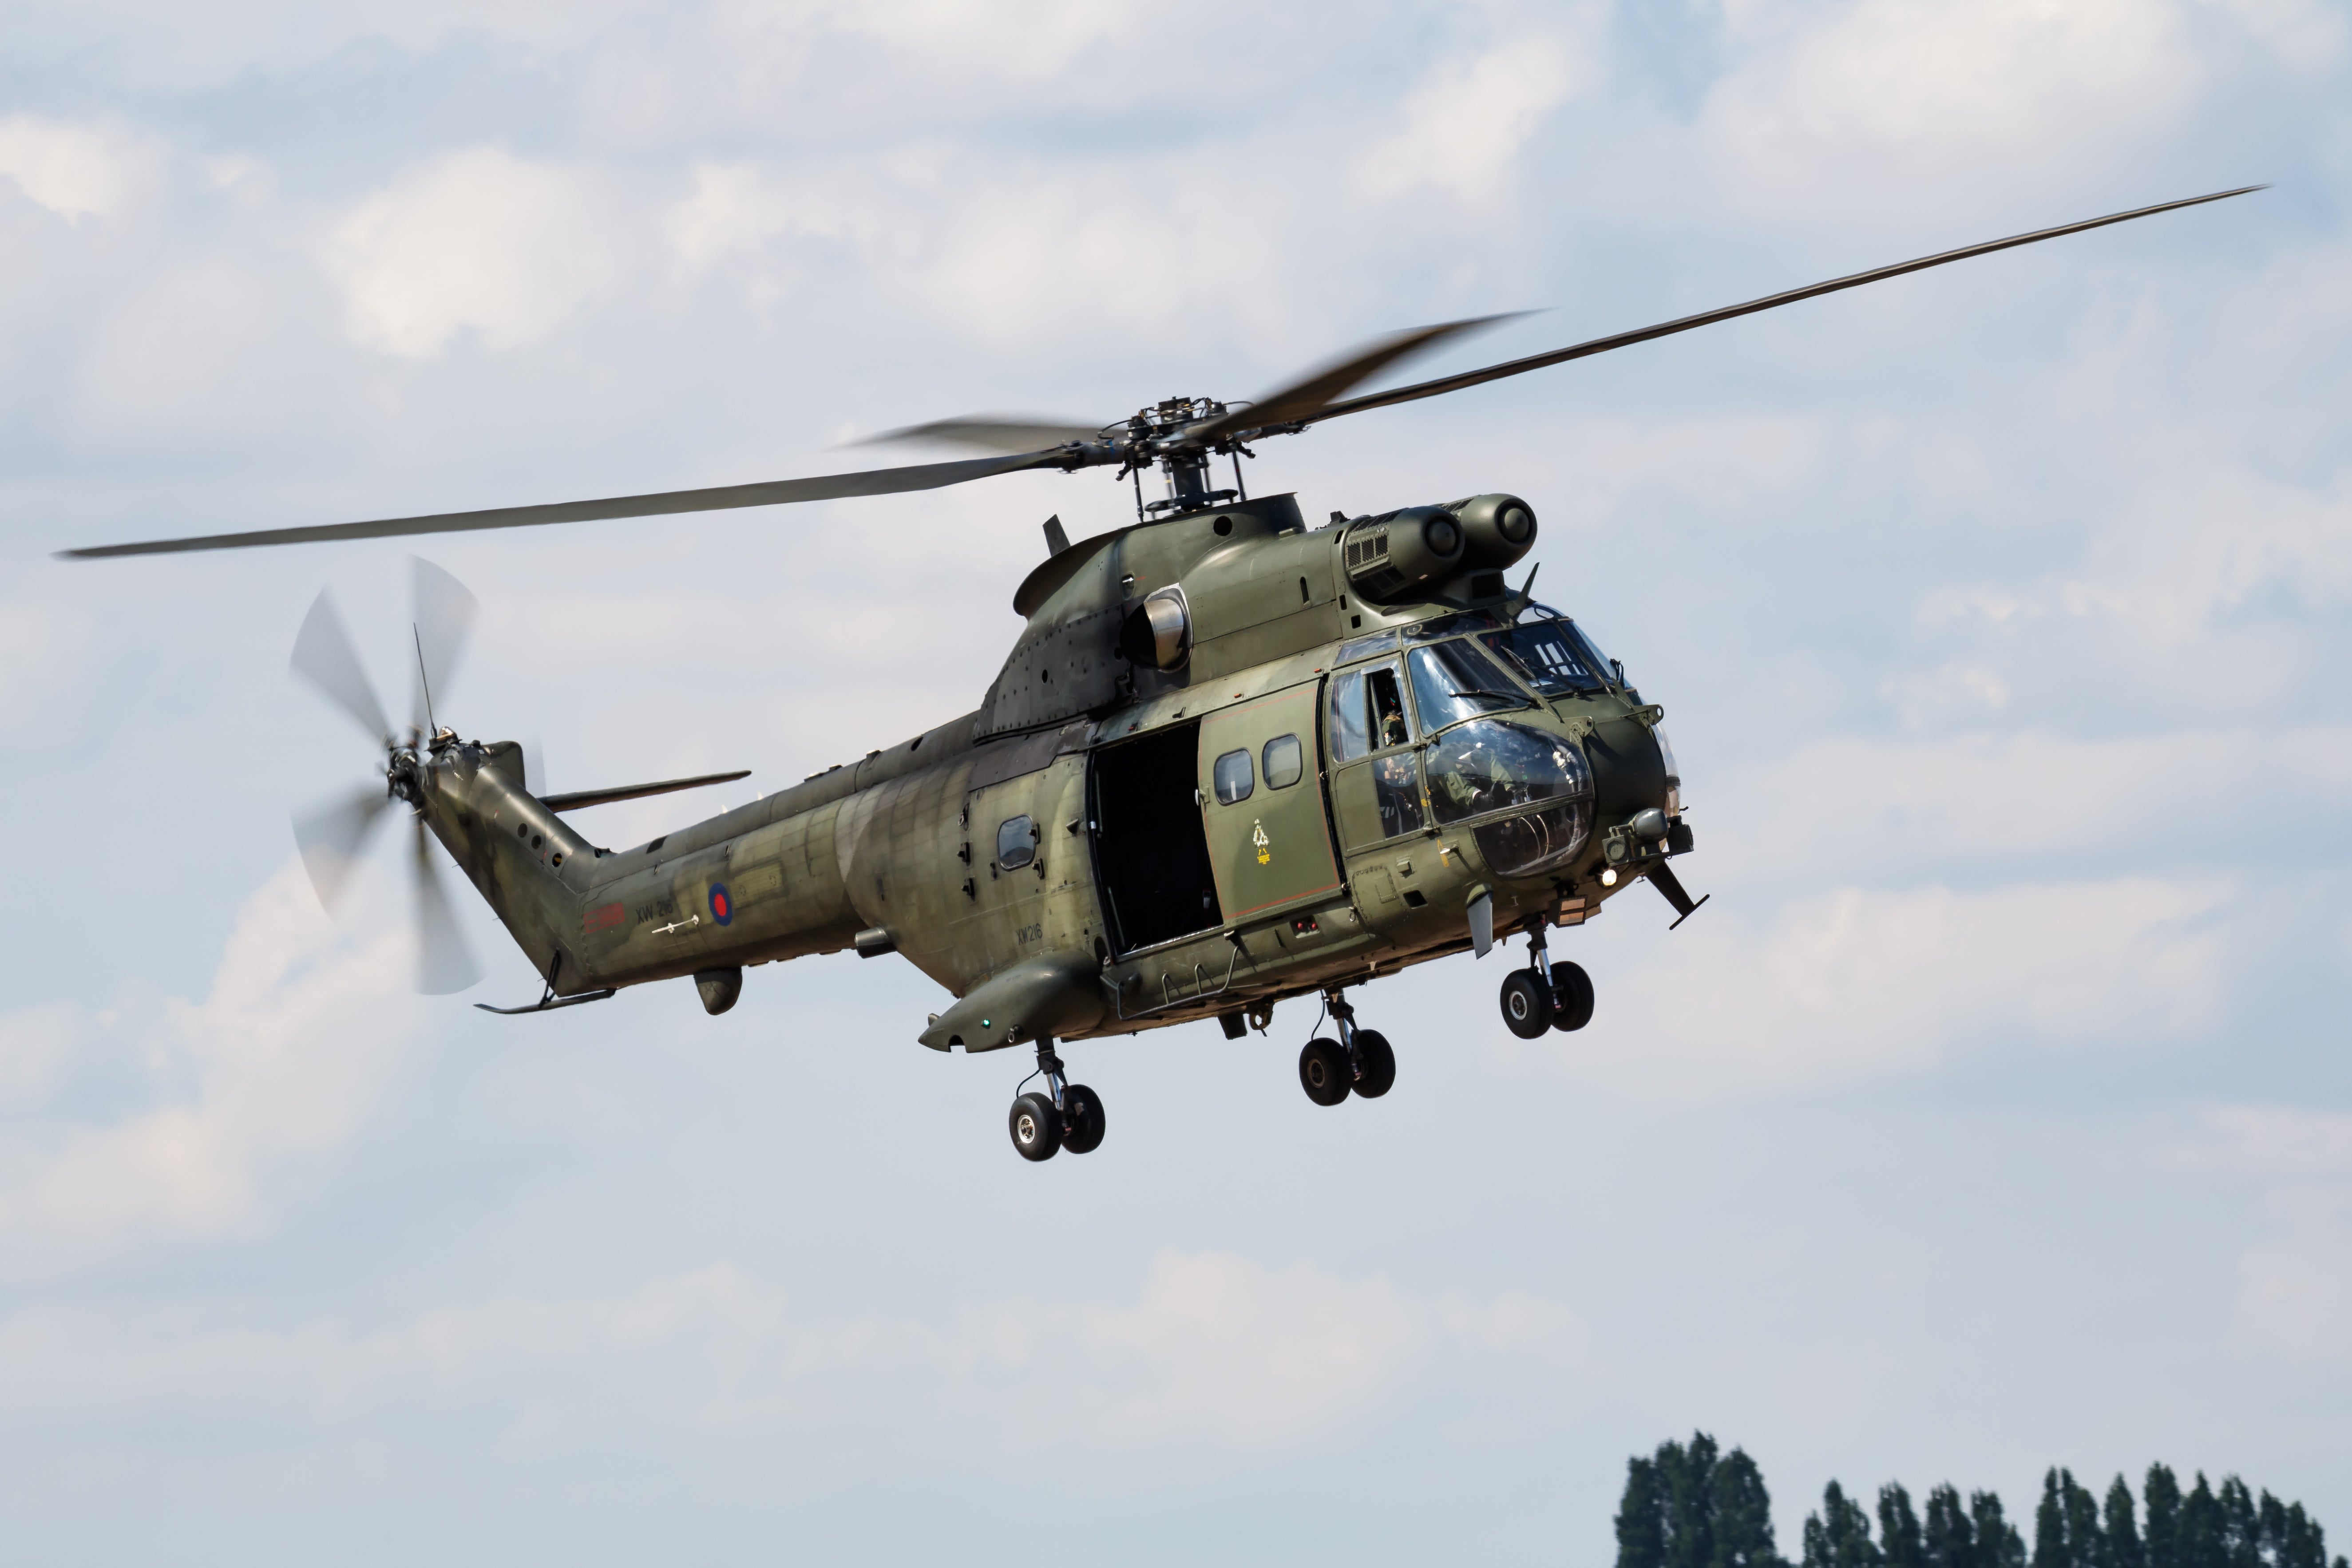 Puma helicopters can be spotted in the skies above some of the RAF’s sites of historical significance from 10am